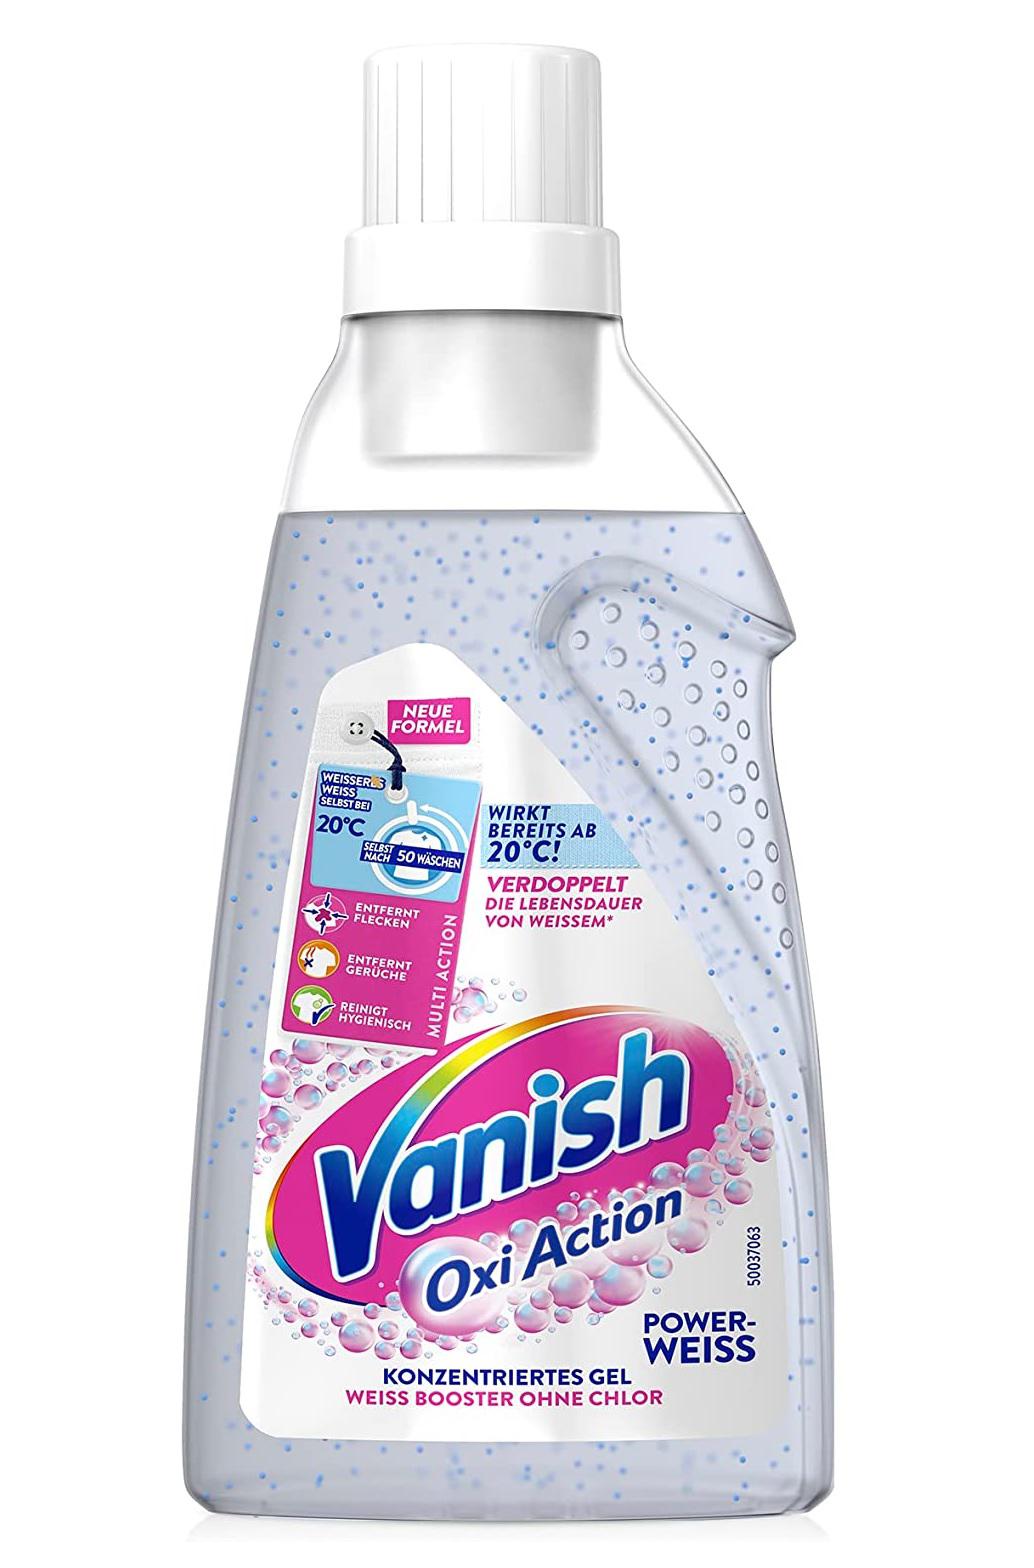 Vanish - Oxi Action White gel stain remover for white fabrics